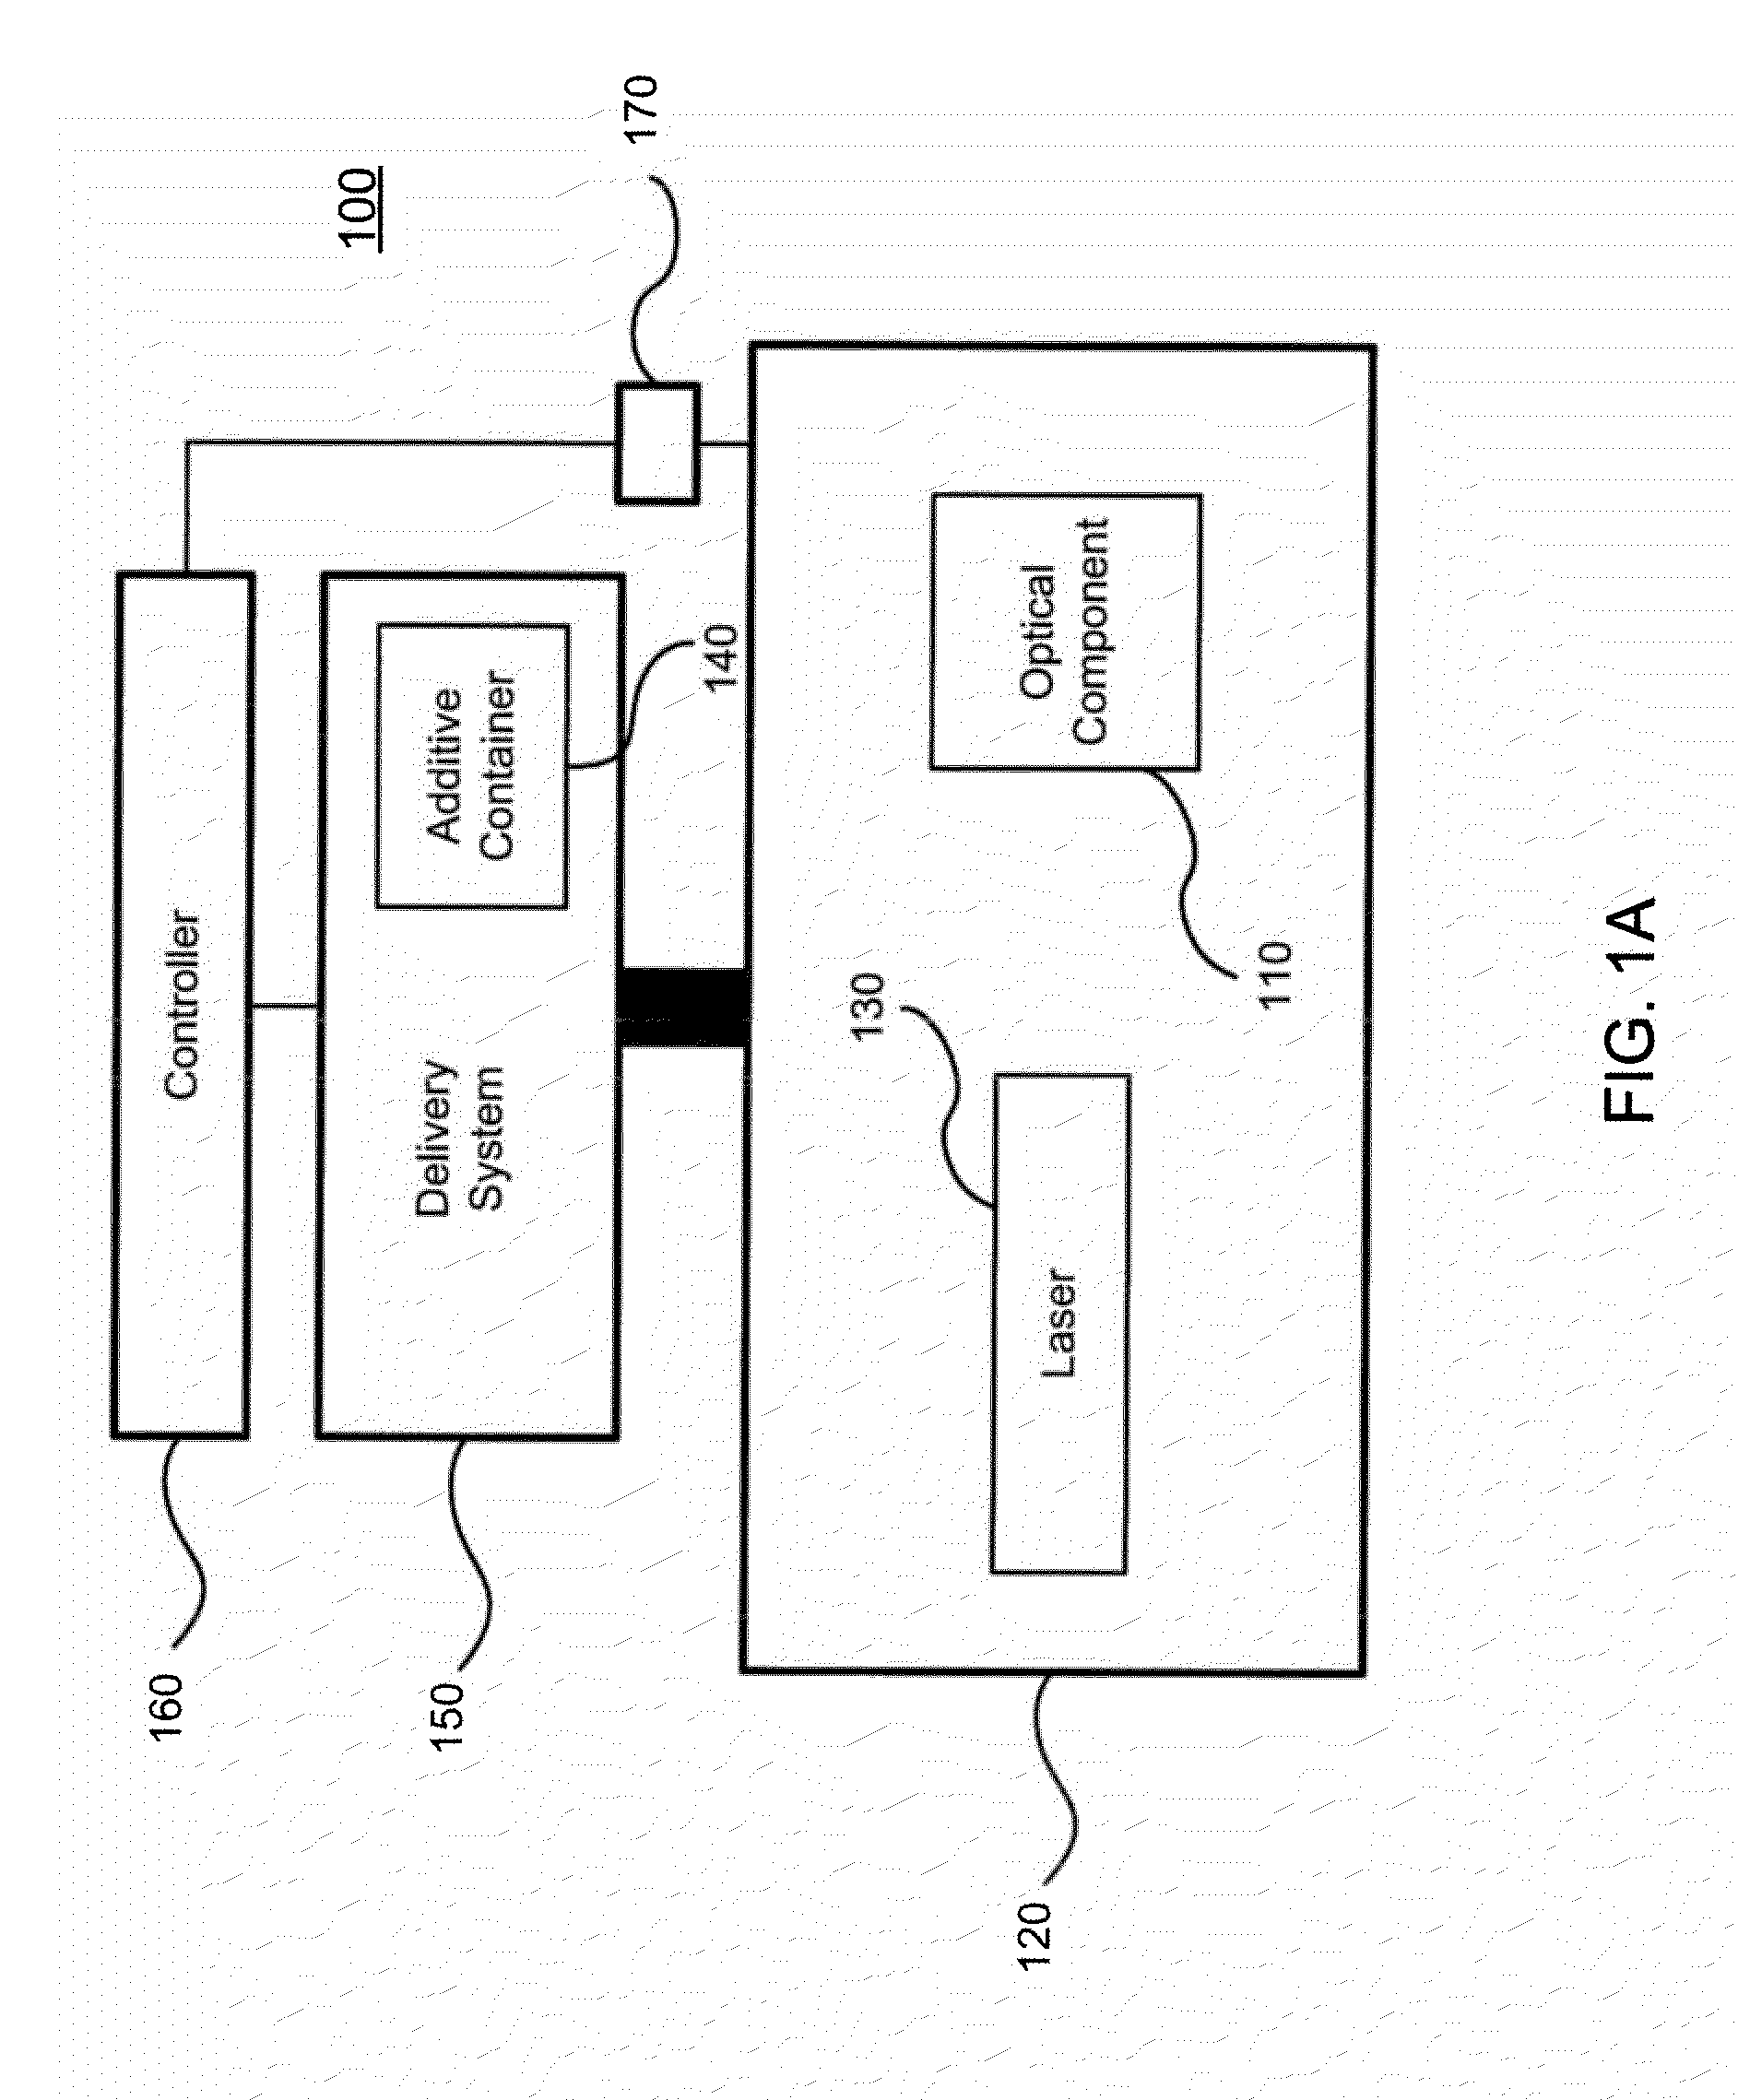 Systems and methods for preventing or reducing contamination enhanced laser induced damage (c-lid) to optical components using gas phase additives